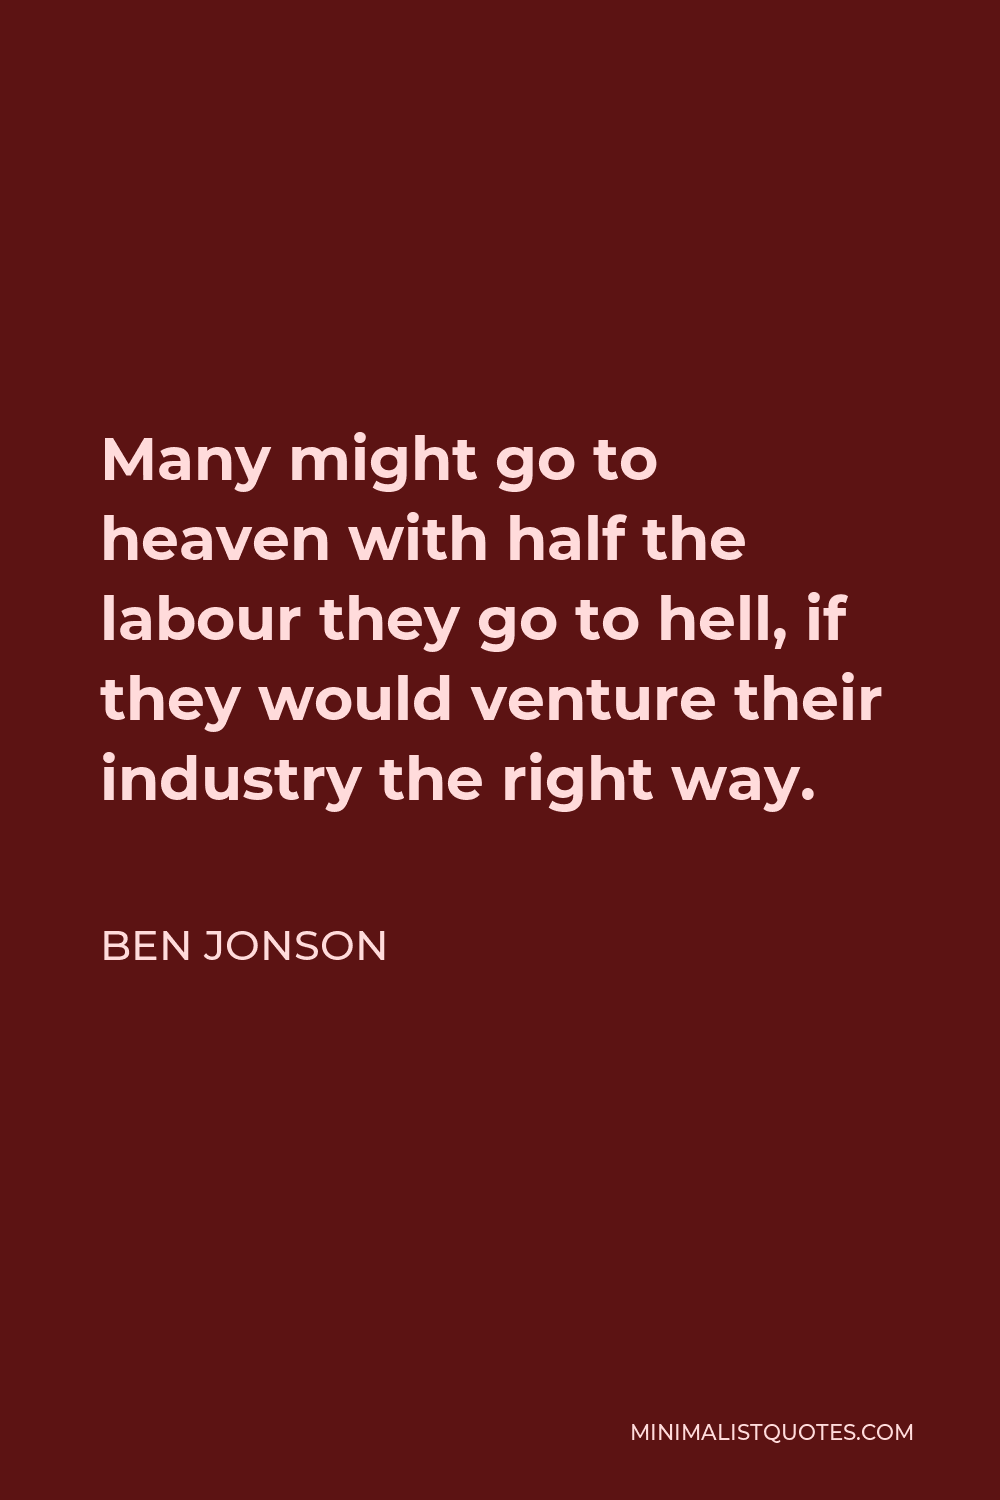 Ben Jonson Quote - Many might go to heaven with half the labour they go to hell, if they would venture their industry the right way.